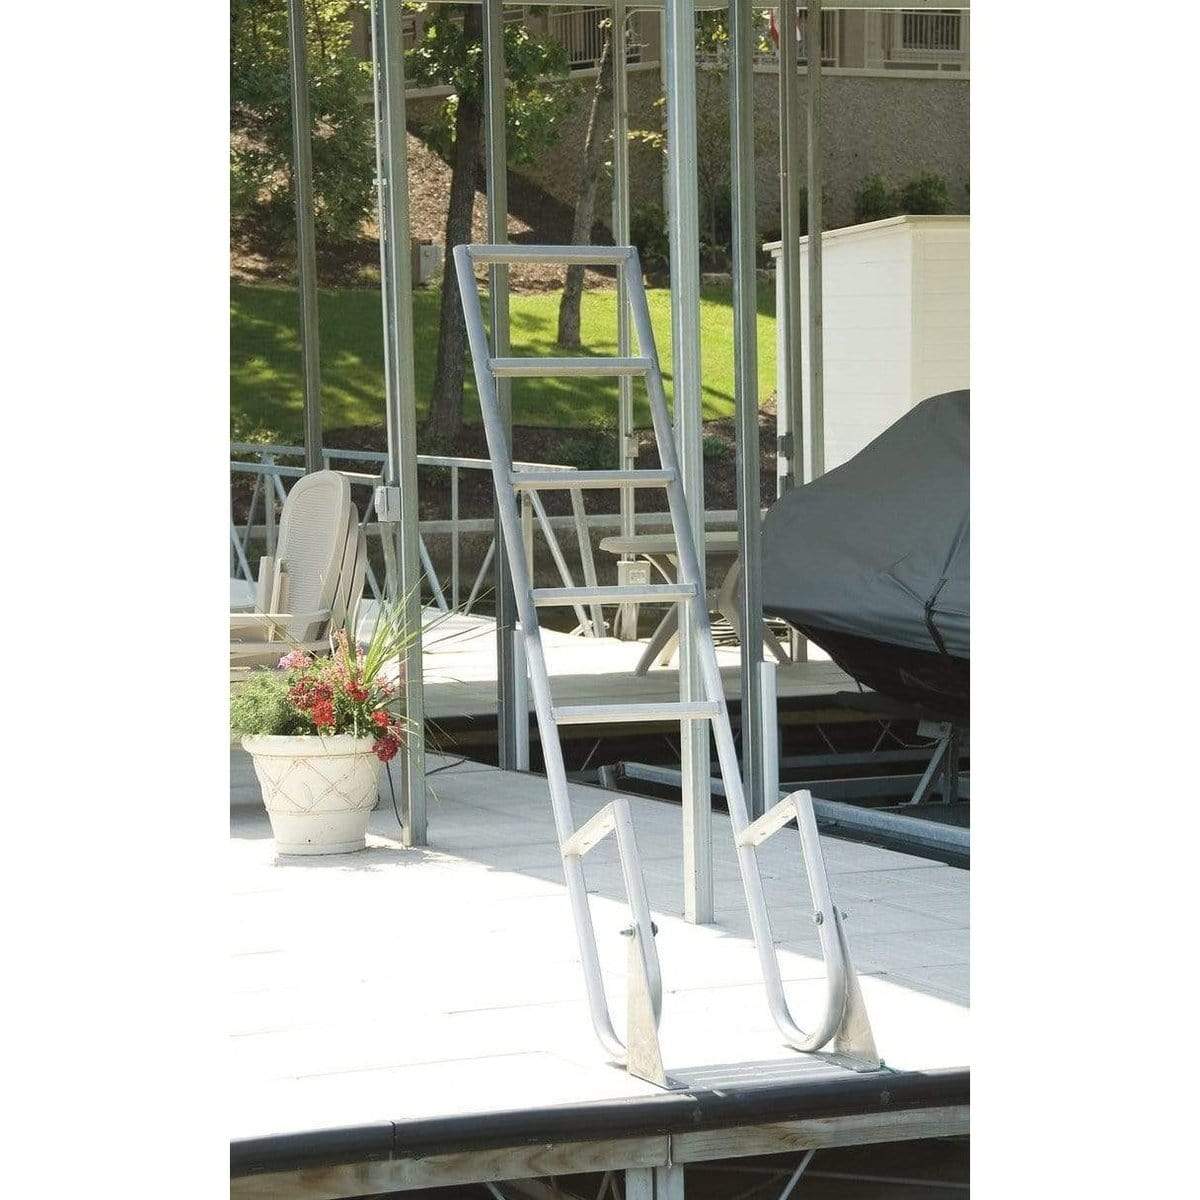 K & R Dock Products Oversized - Not Qualified for Free Shipping K&R 5-Step Aluminum Swing-up Ladder #LD-5STSLD